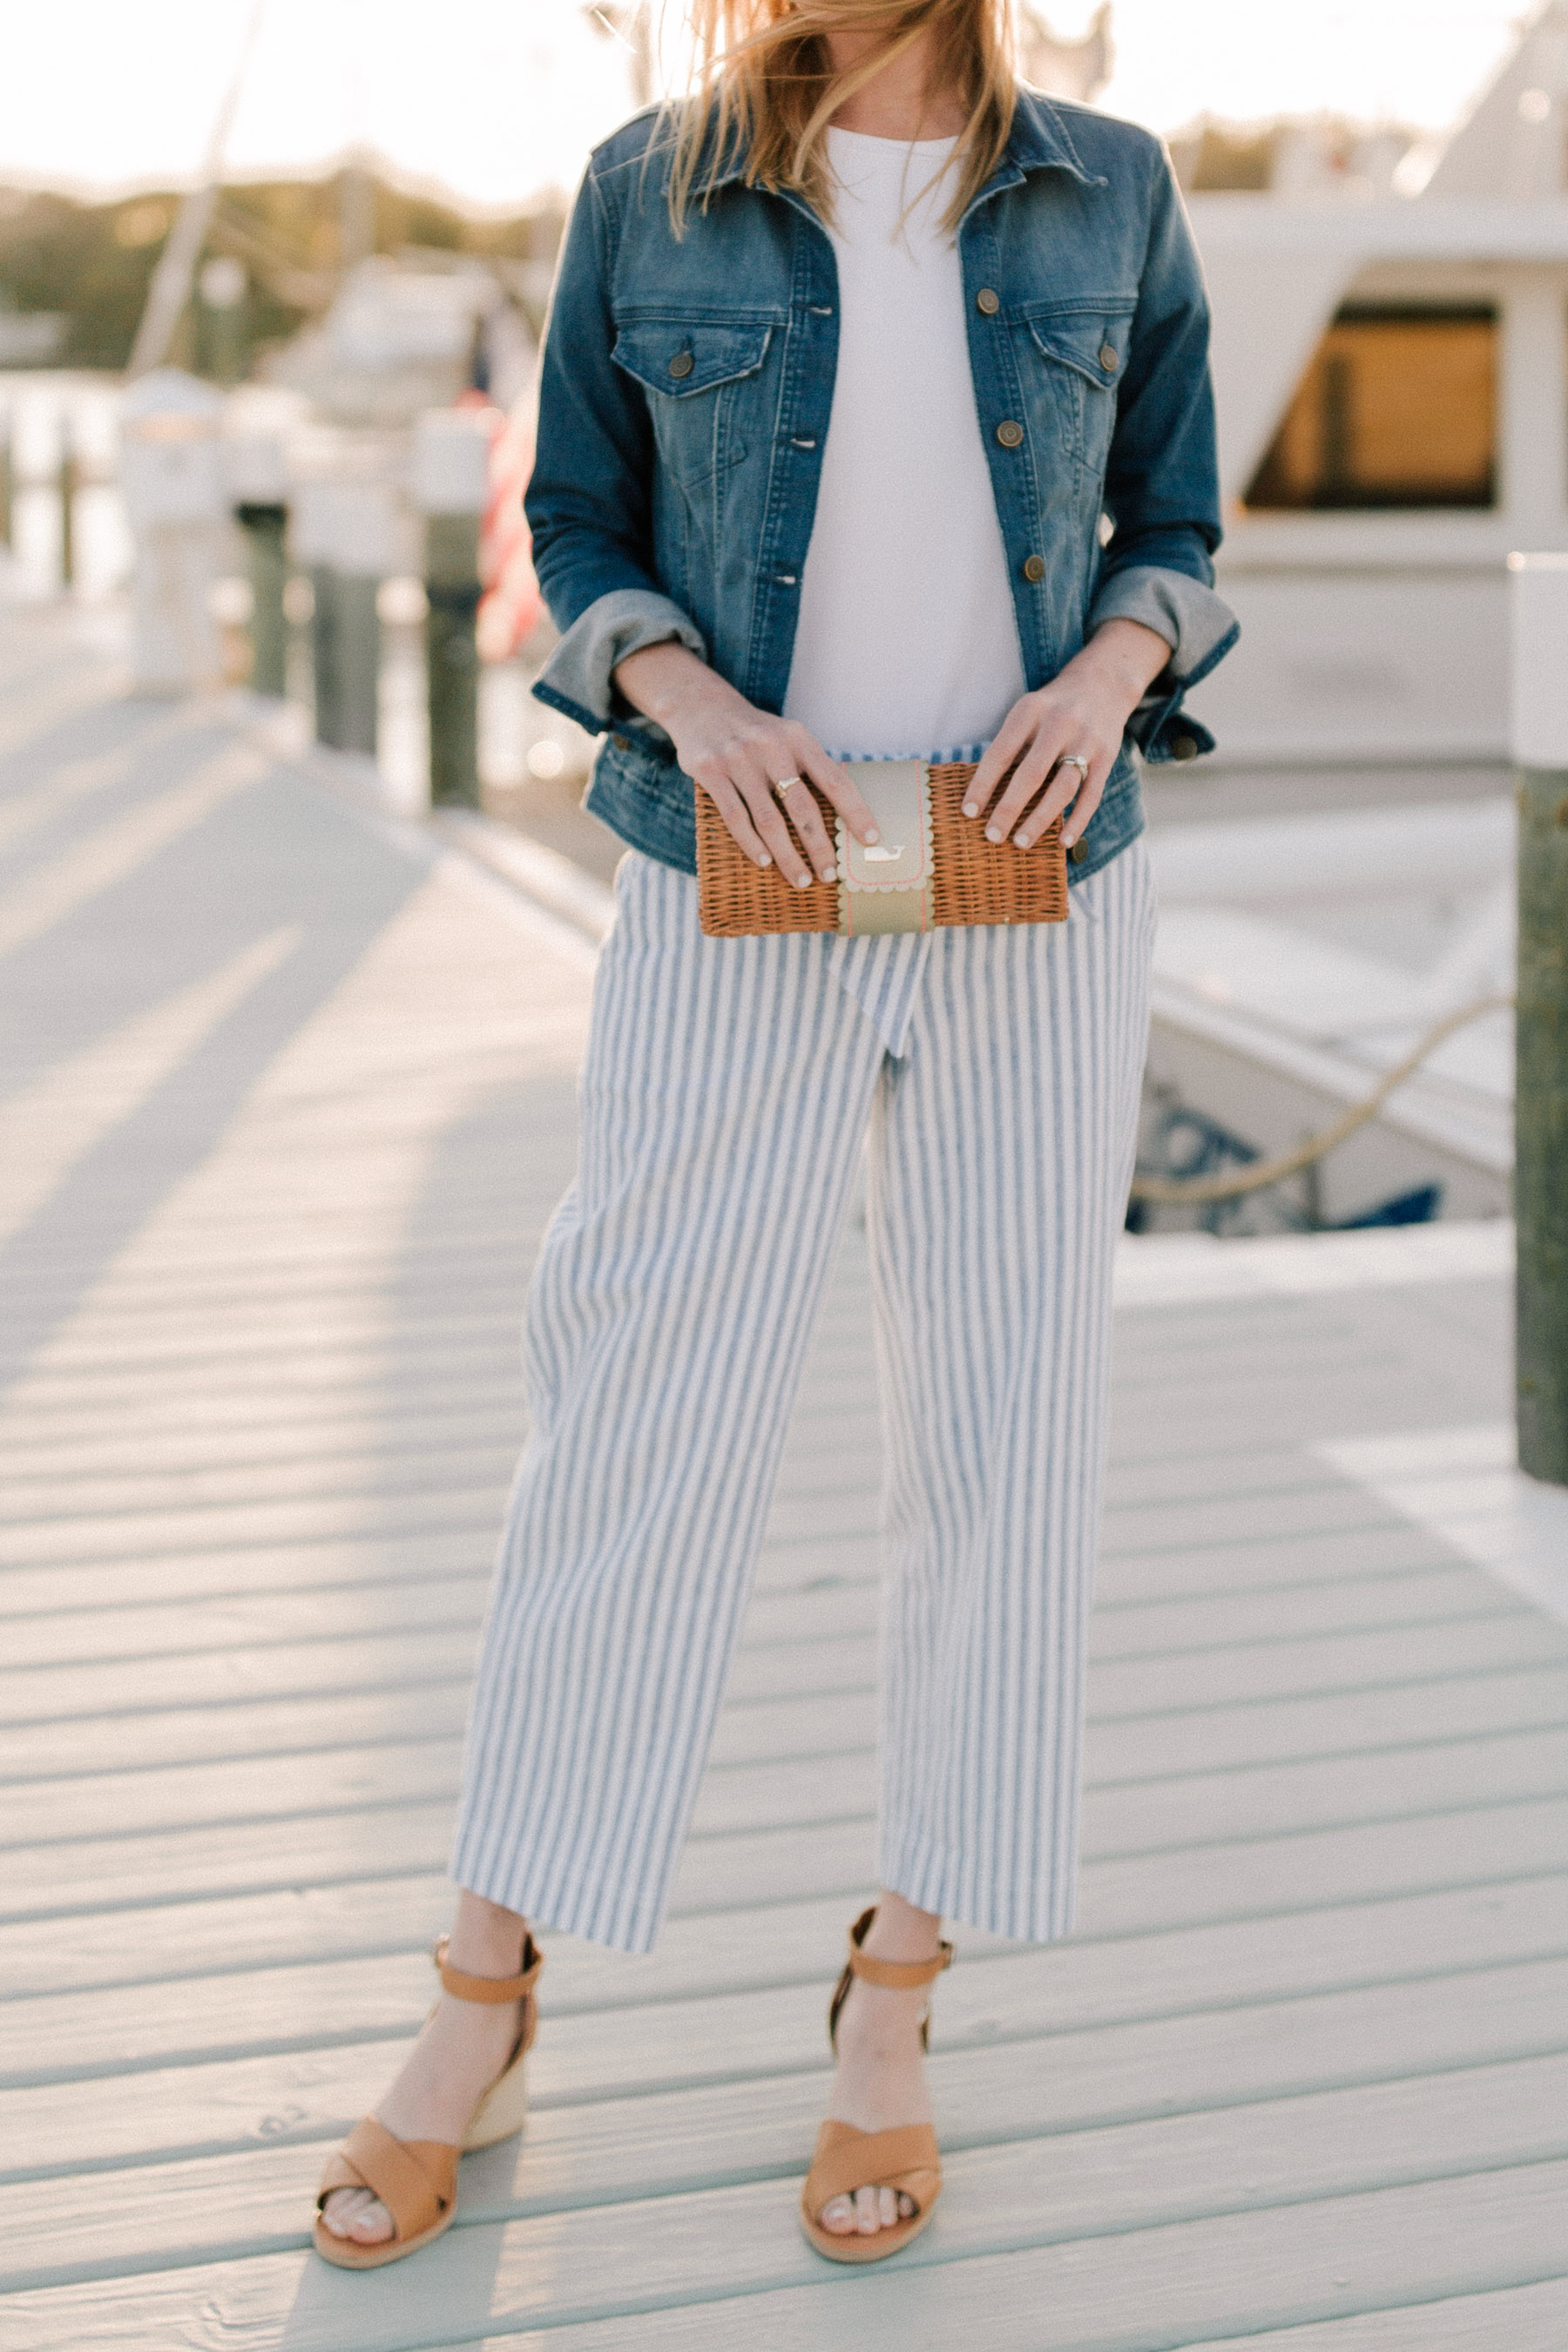 6 Ways to Wear the Classic Blue Striped Shirt  Le Chic Street